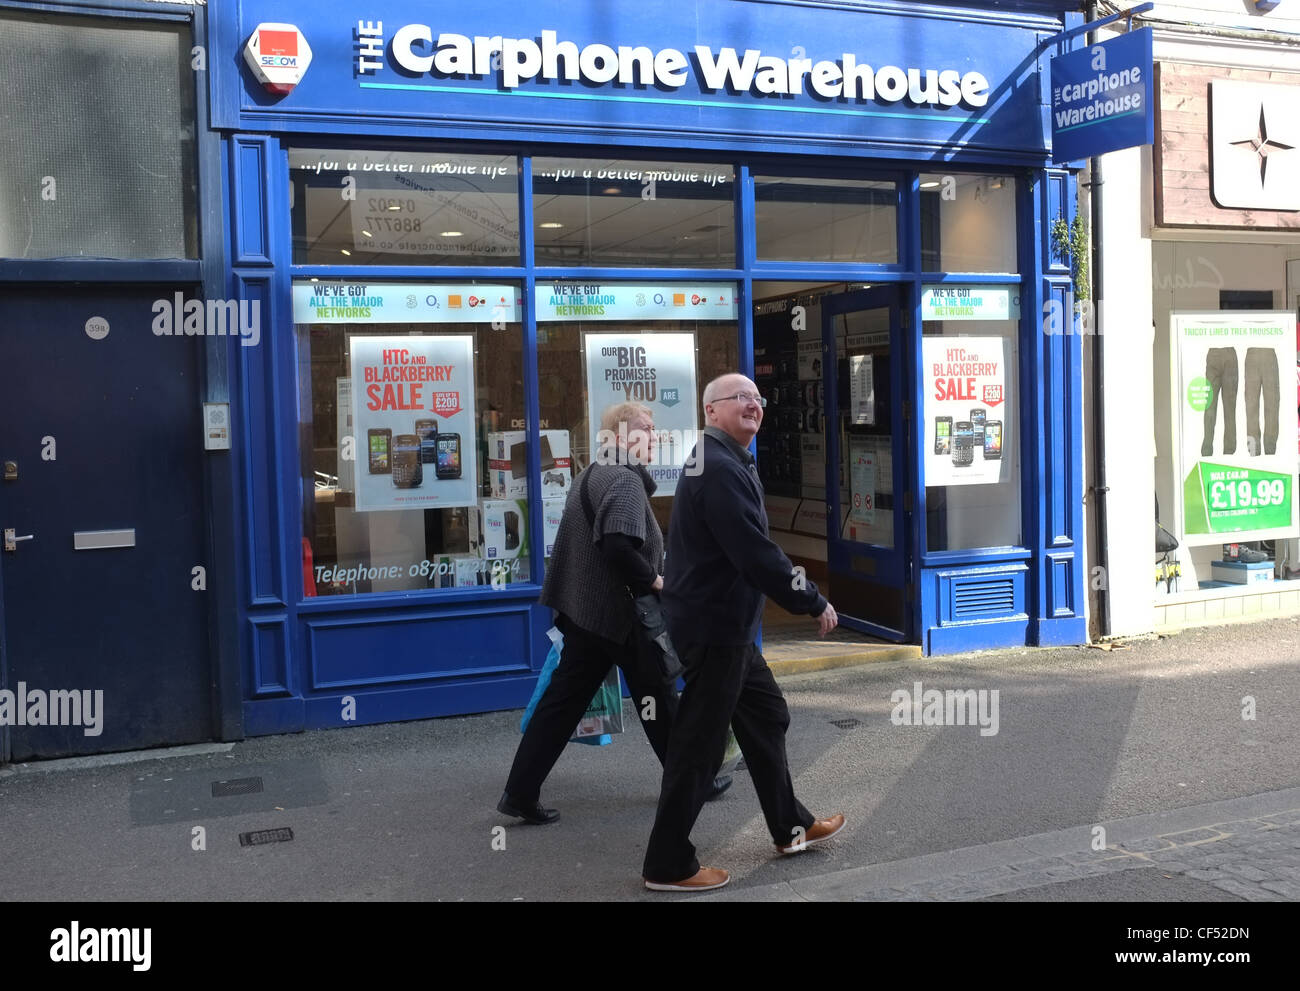 Two older people walk past the Carphone Warehouse in Falmouth, UK Stock Photo